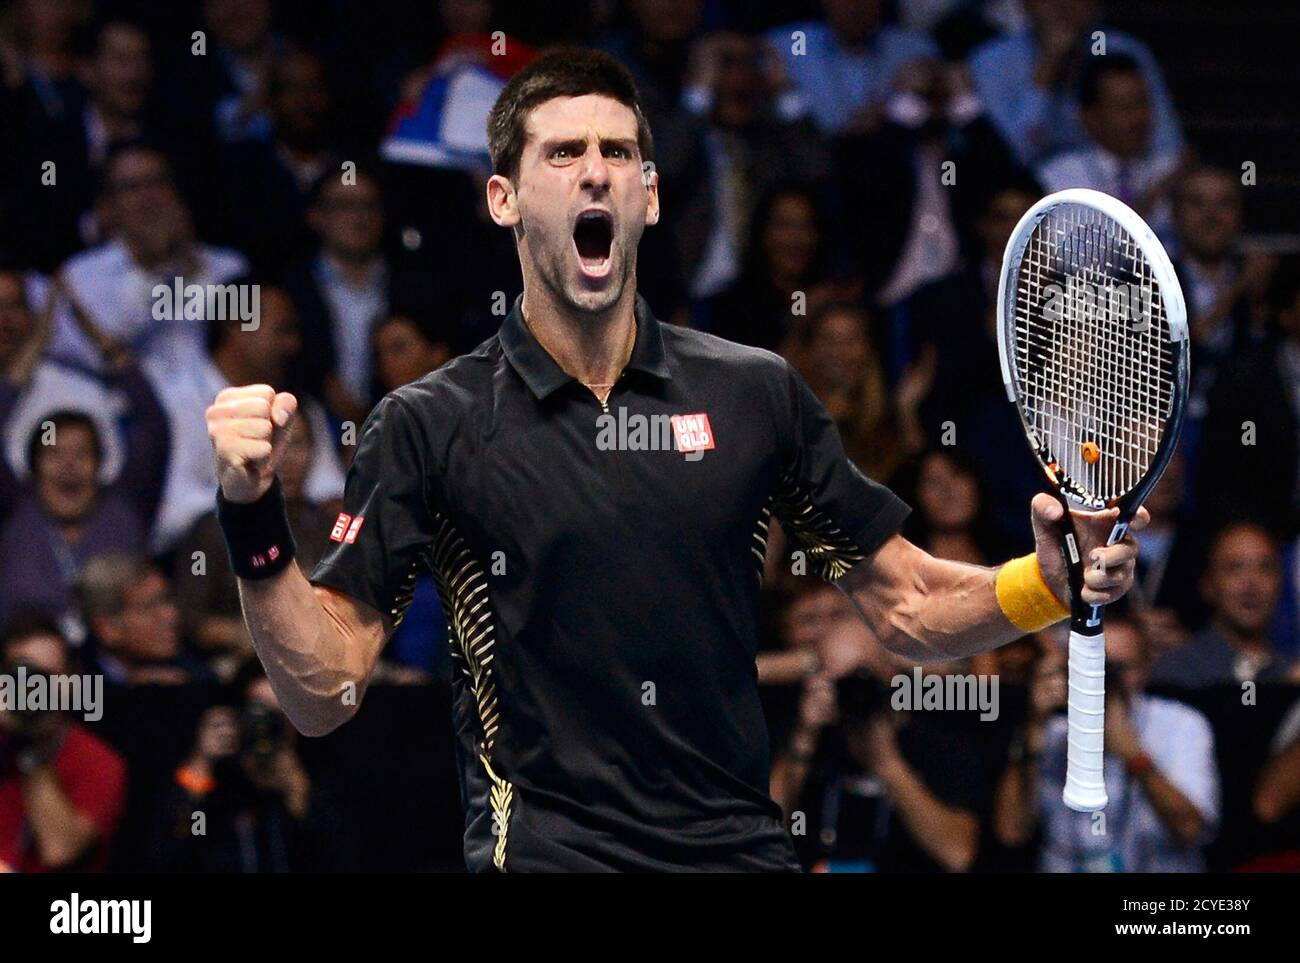 Serbia's Novak Djokovic celebrates beating Switzerland's Roger Federer in  their final tennis match at the ATP World Tour Finals at the O2 Arena in  London November 12, 2012. Djokovic cemented his place